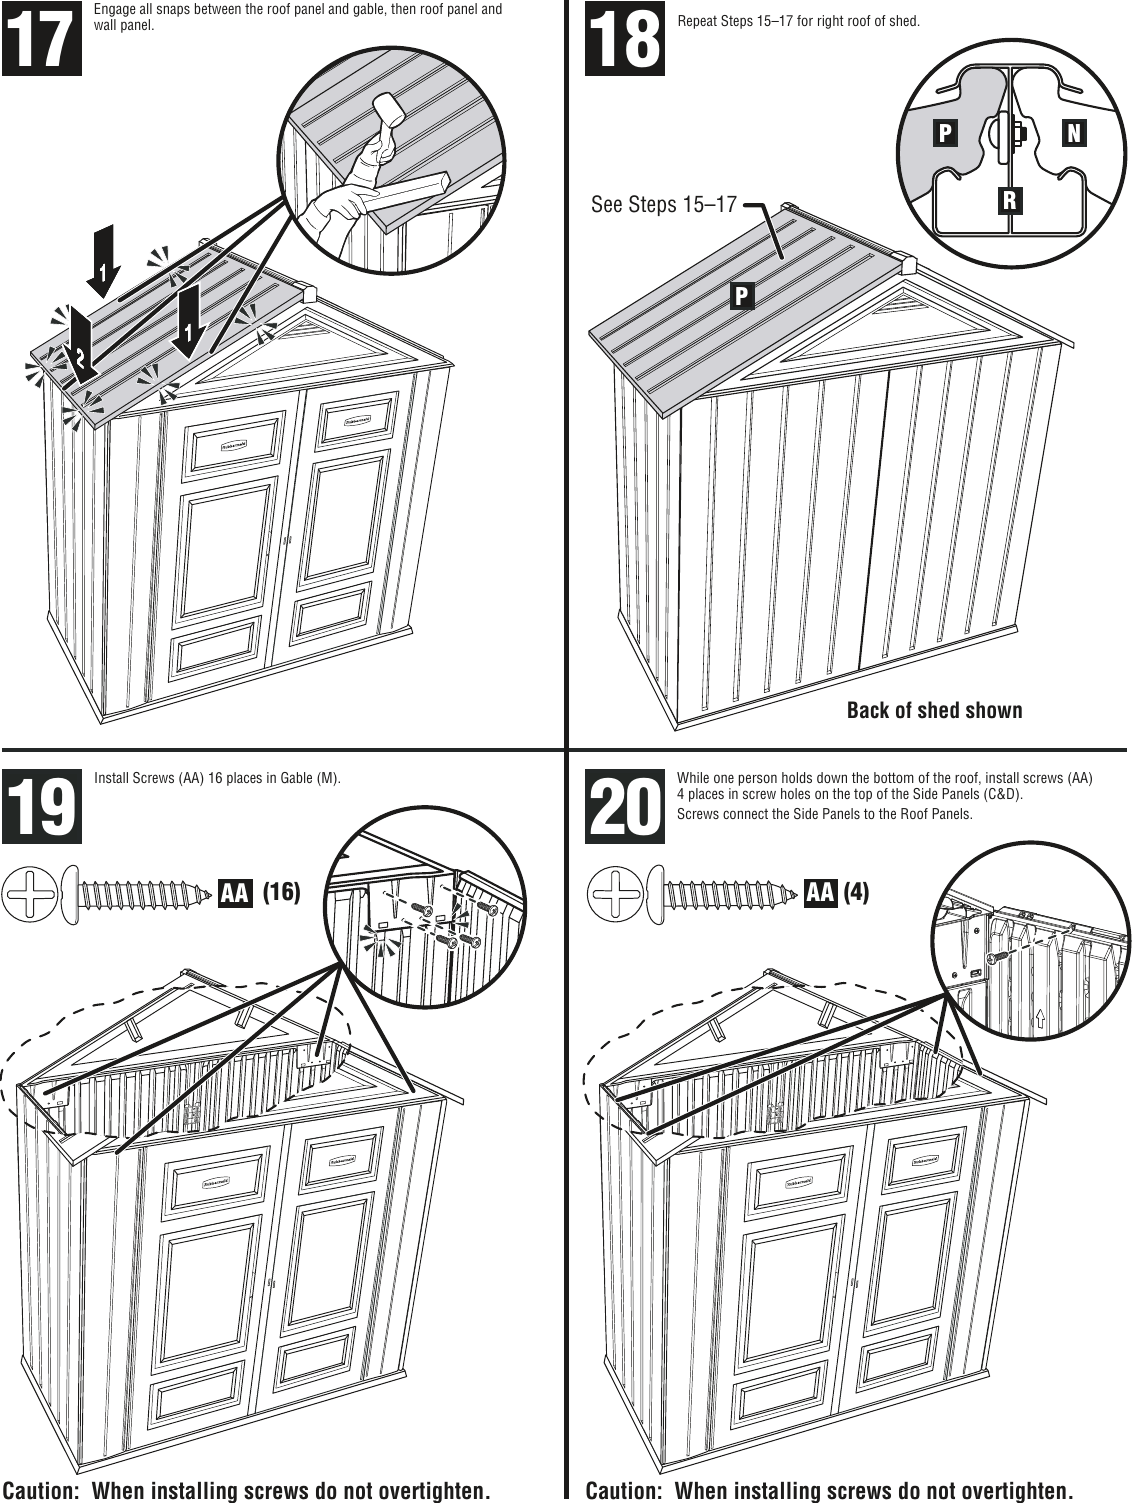 Page 7 of 9 - Rubbermaid Rubbermaid-Outdoor-Storage-1S85-Users-Manual- Big Max Jr Assembly Instruction Manual English  Rubbermaid-outdoor-storage-1s85-users-manual